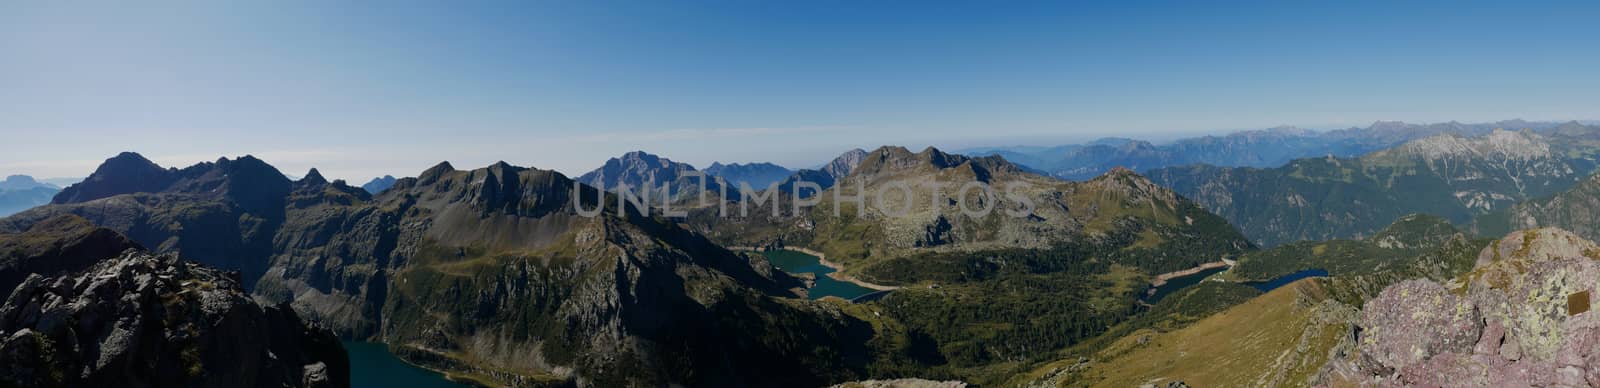 Panoramic view of lake Colombo basin and dam on the Bergamo Alps, northern Italy
